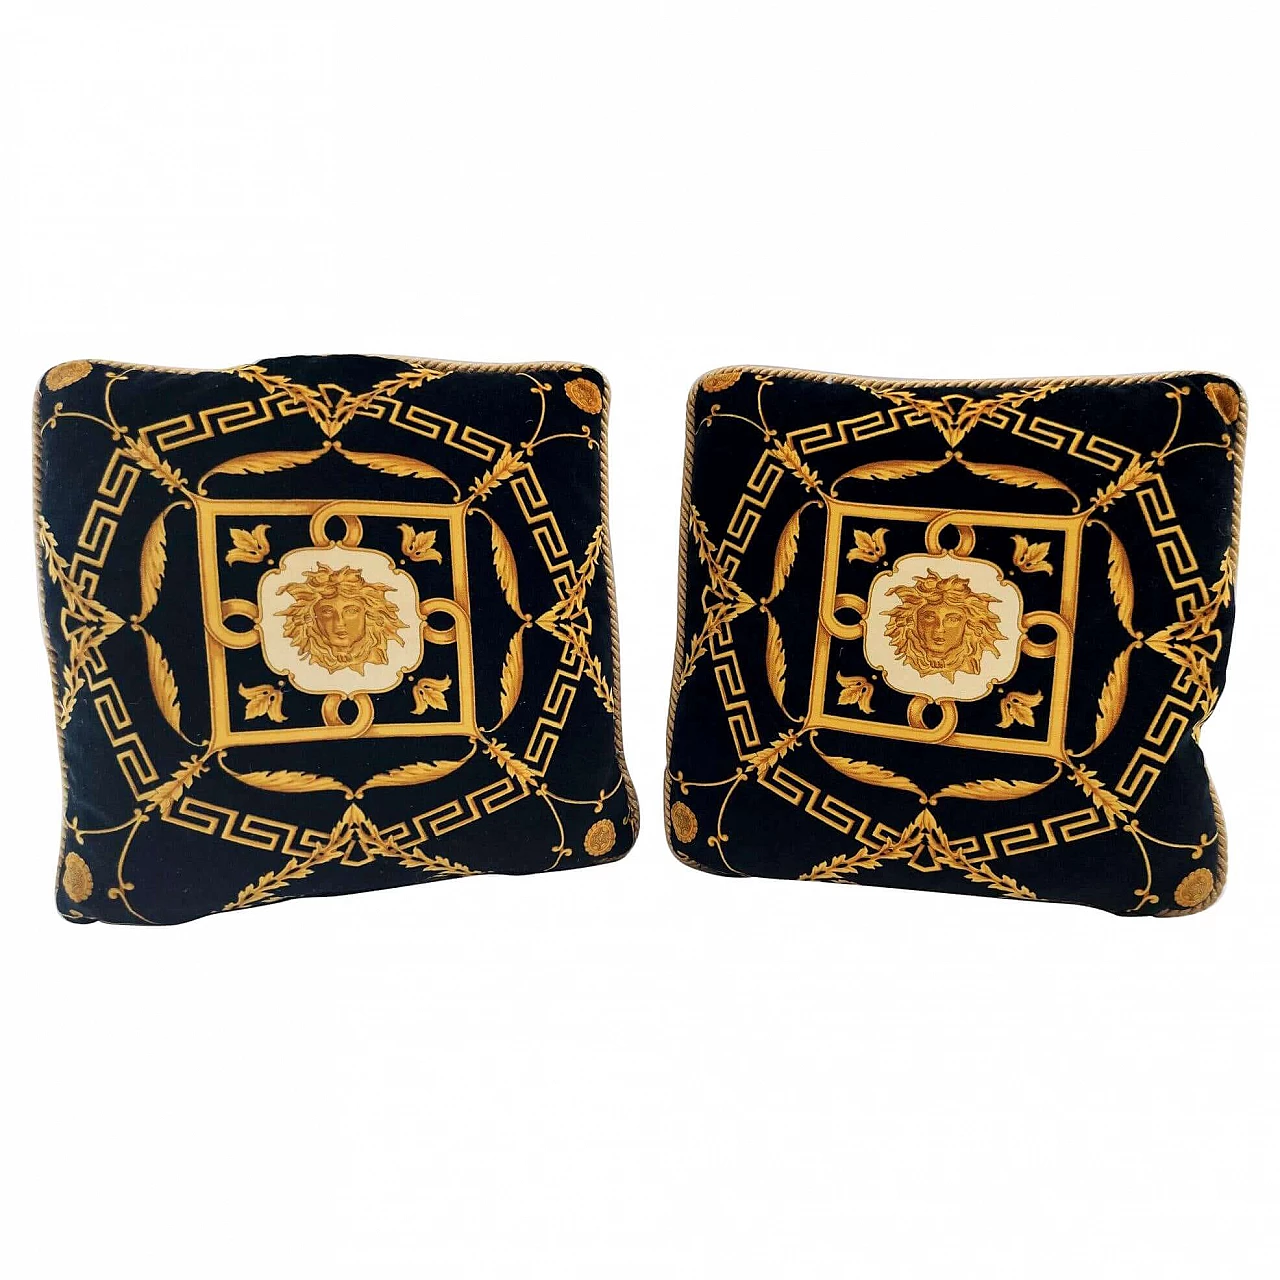 Pair of black cushions by Gianni Versace, 1980s 10